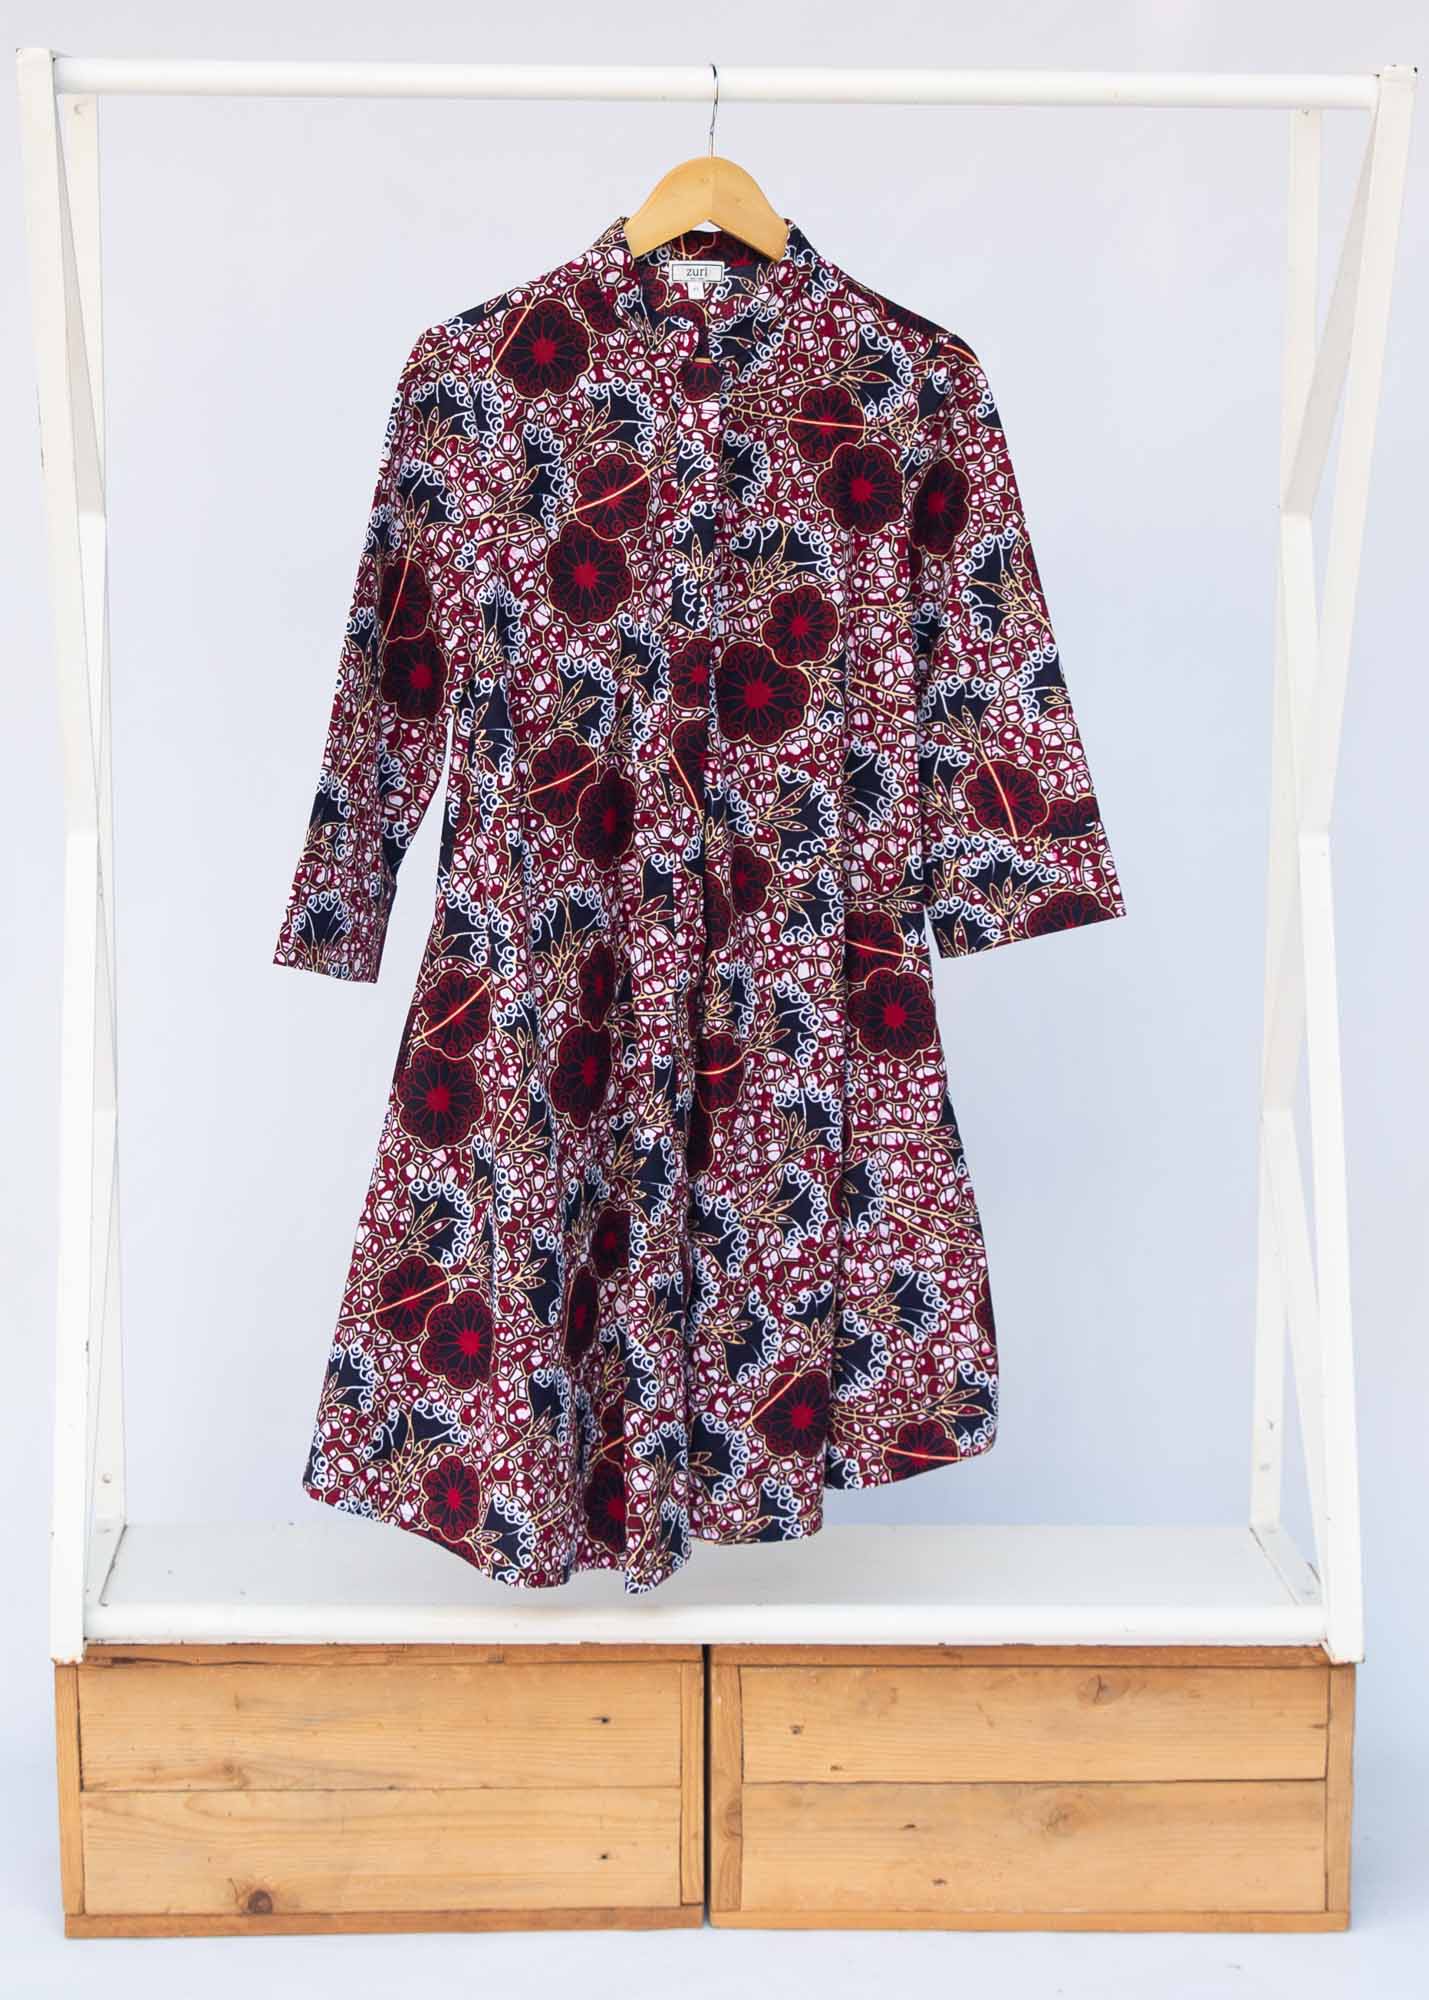 Display of burgundy, white and navy blue floral print dress